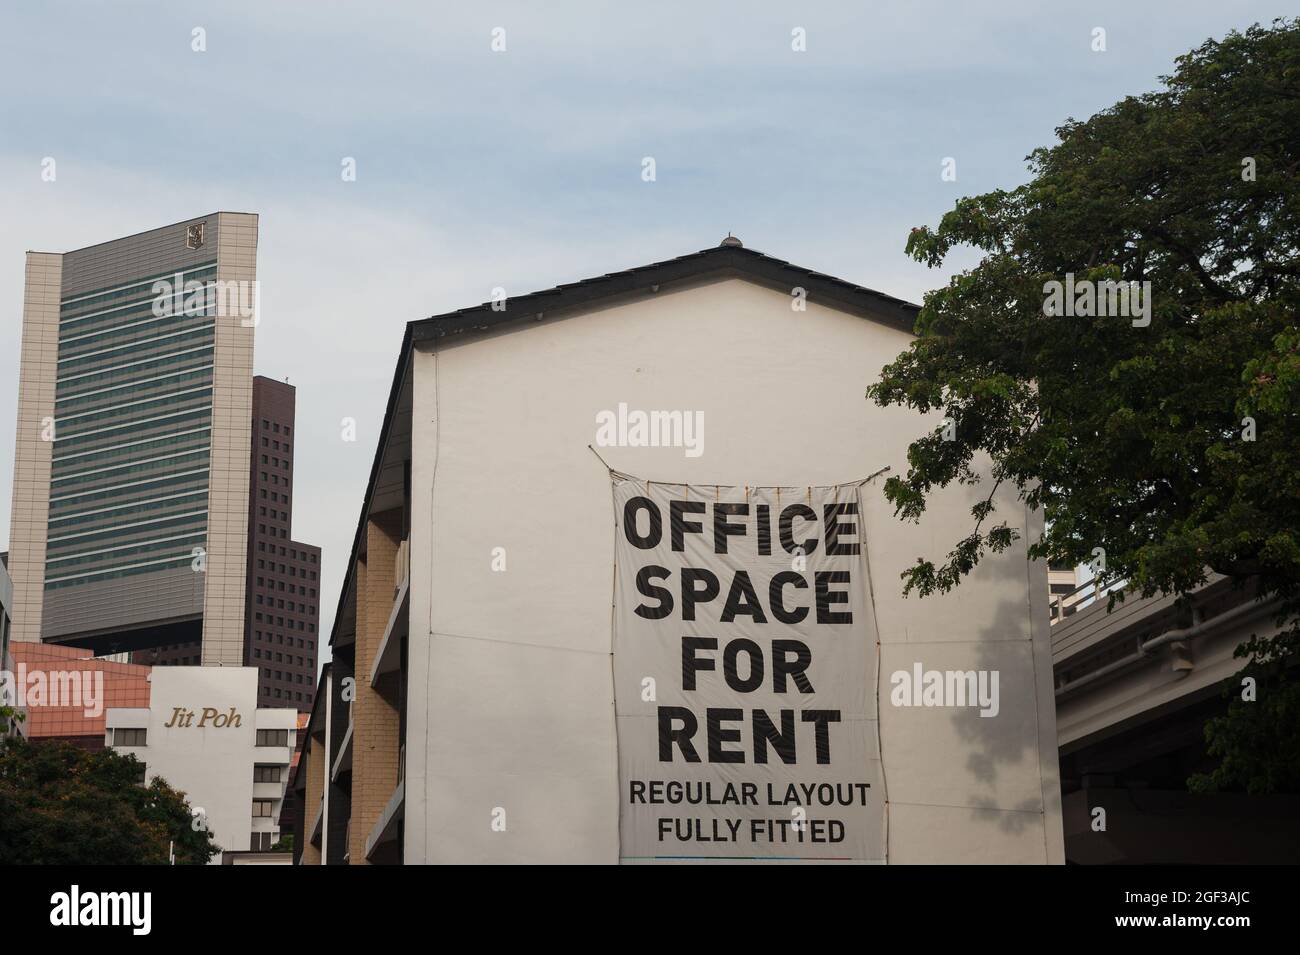 19.07.2017, Singapore, Republic of Singapore, Asia - A banner on a building in the city centre advertises for available Office Space For Rent. Stock Photo